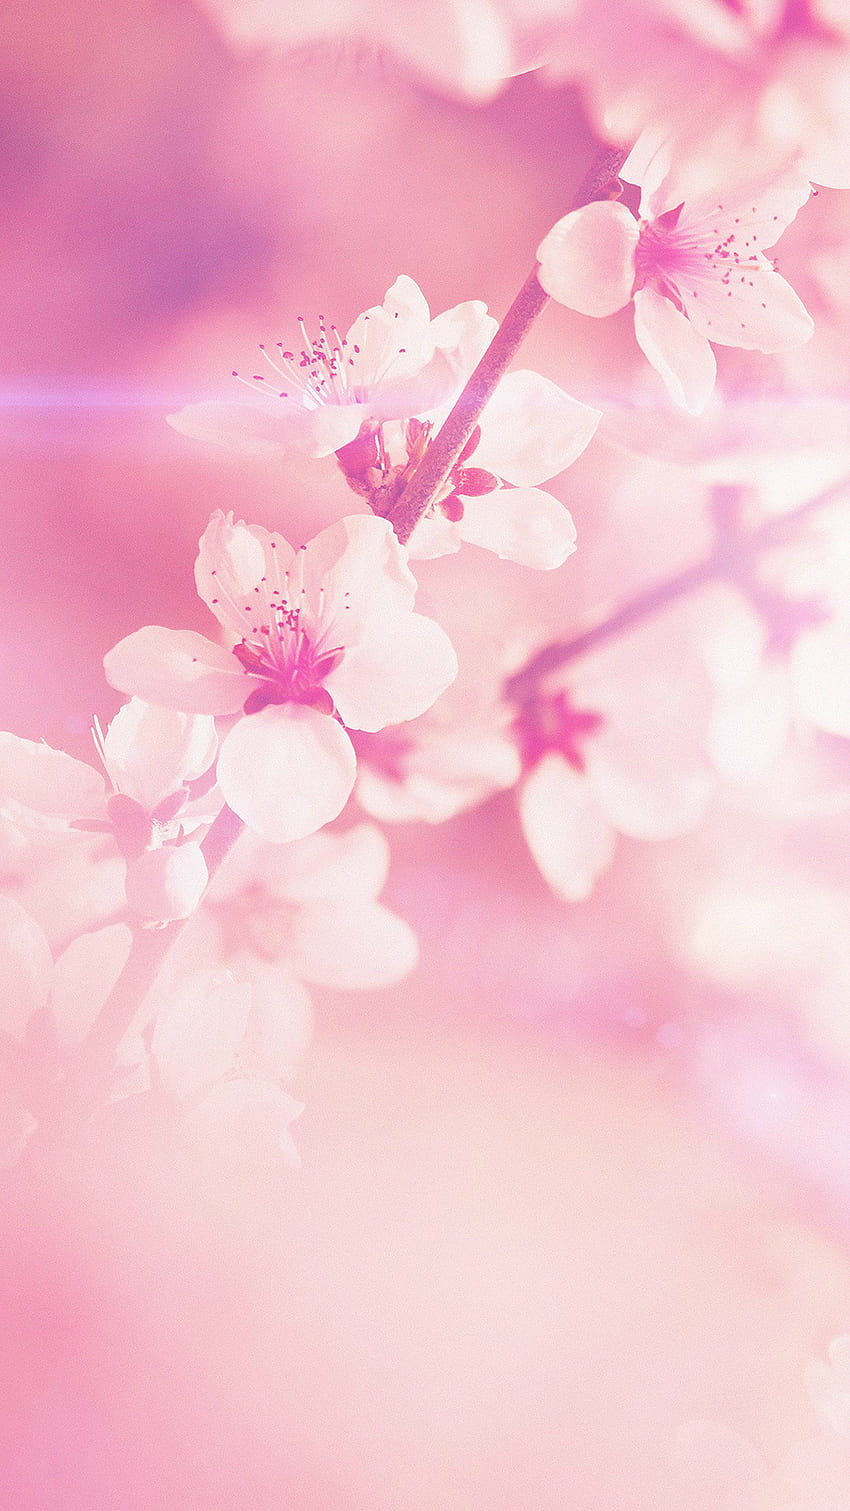 Spring Flower Pink Cherry Blossom Flare Nature iPhone 6 HD phone wallpaper